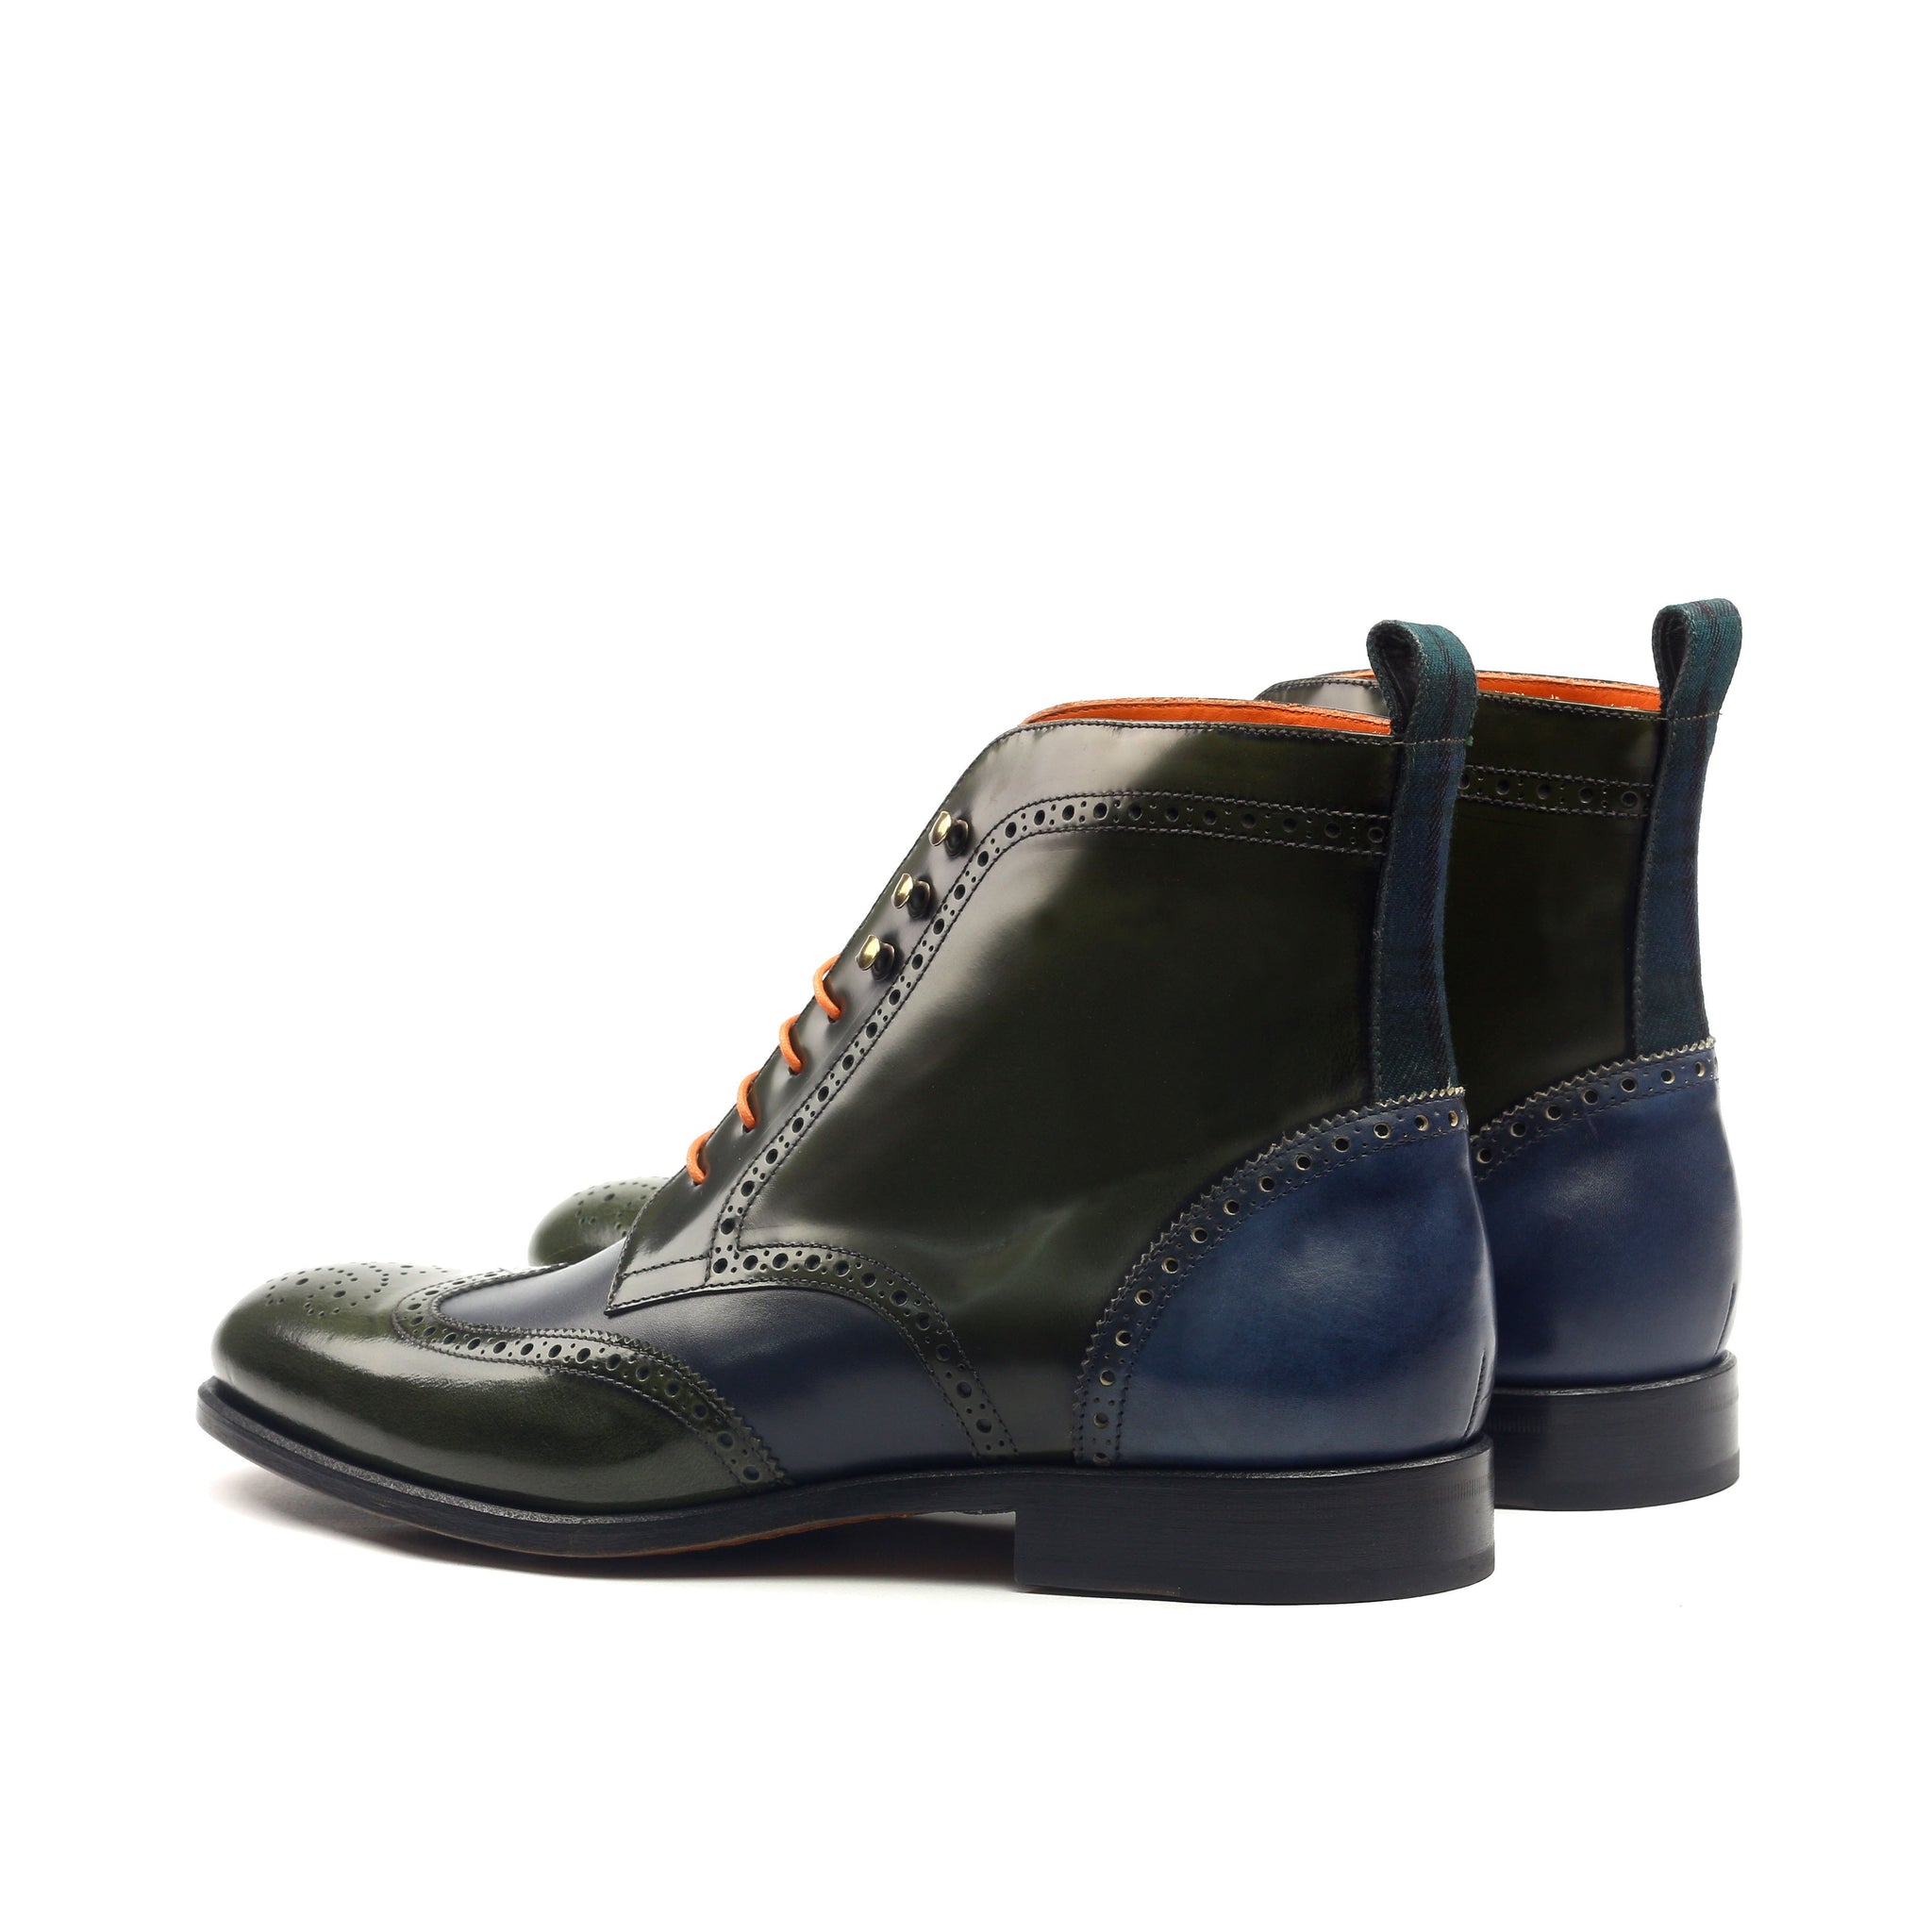 Unique Handcrafted Green/Blue Military Style boot